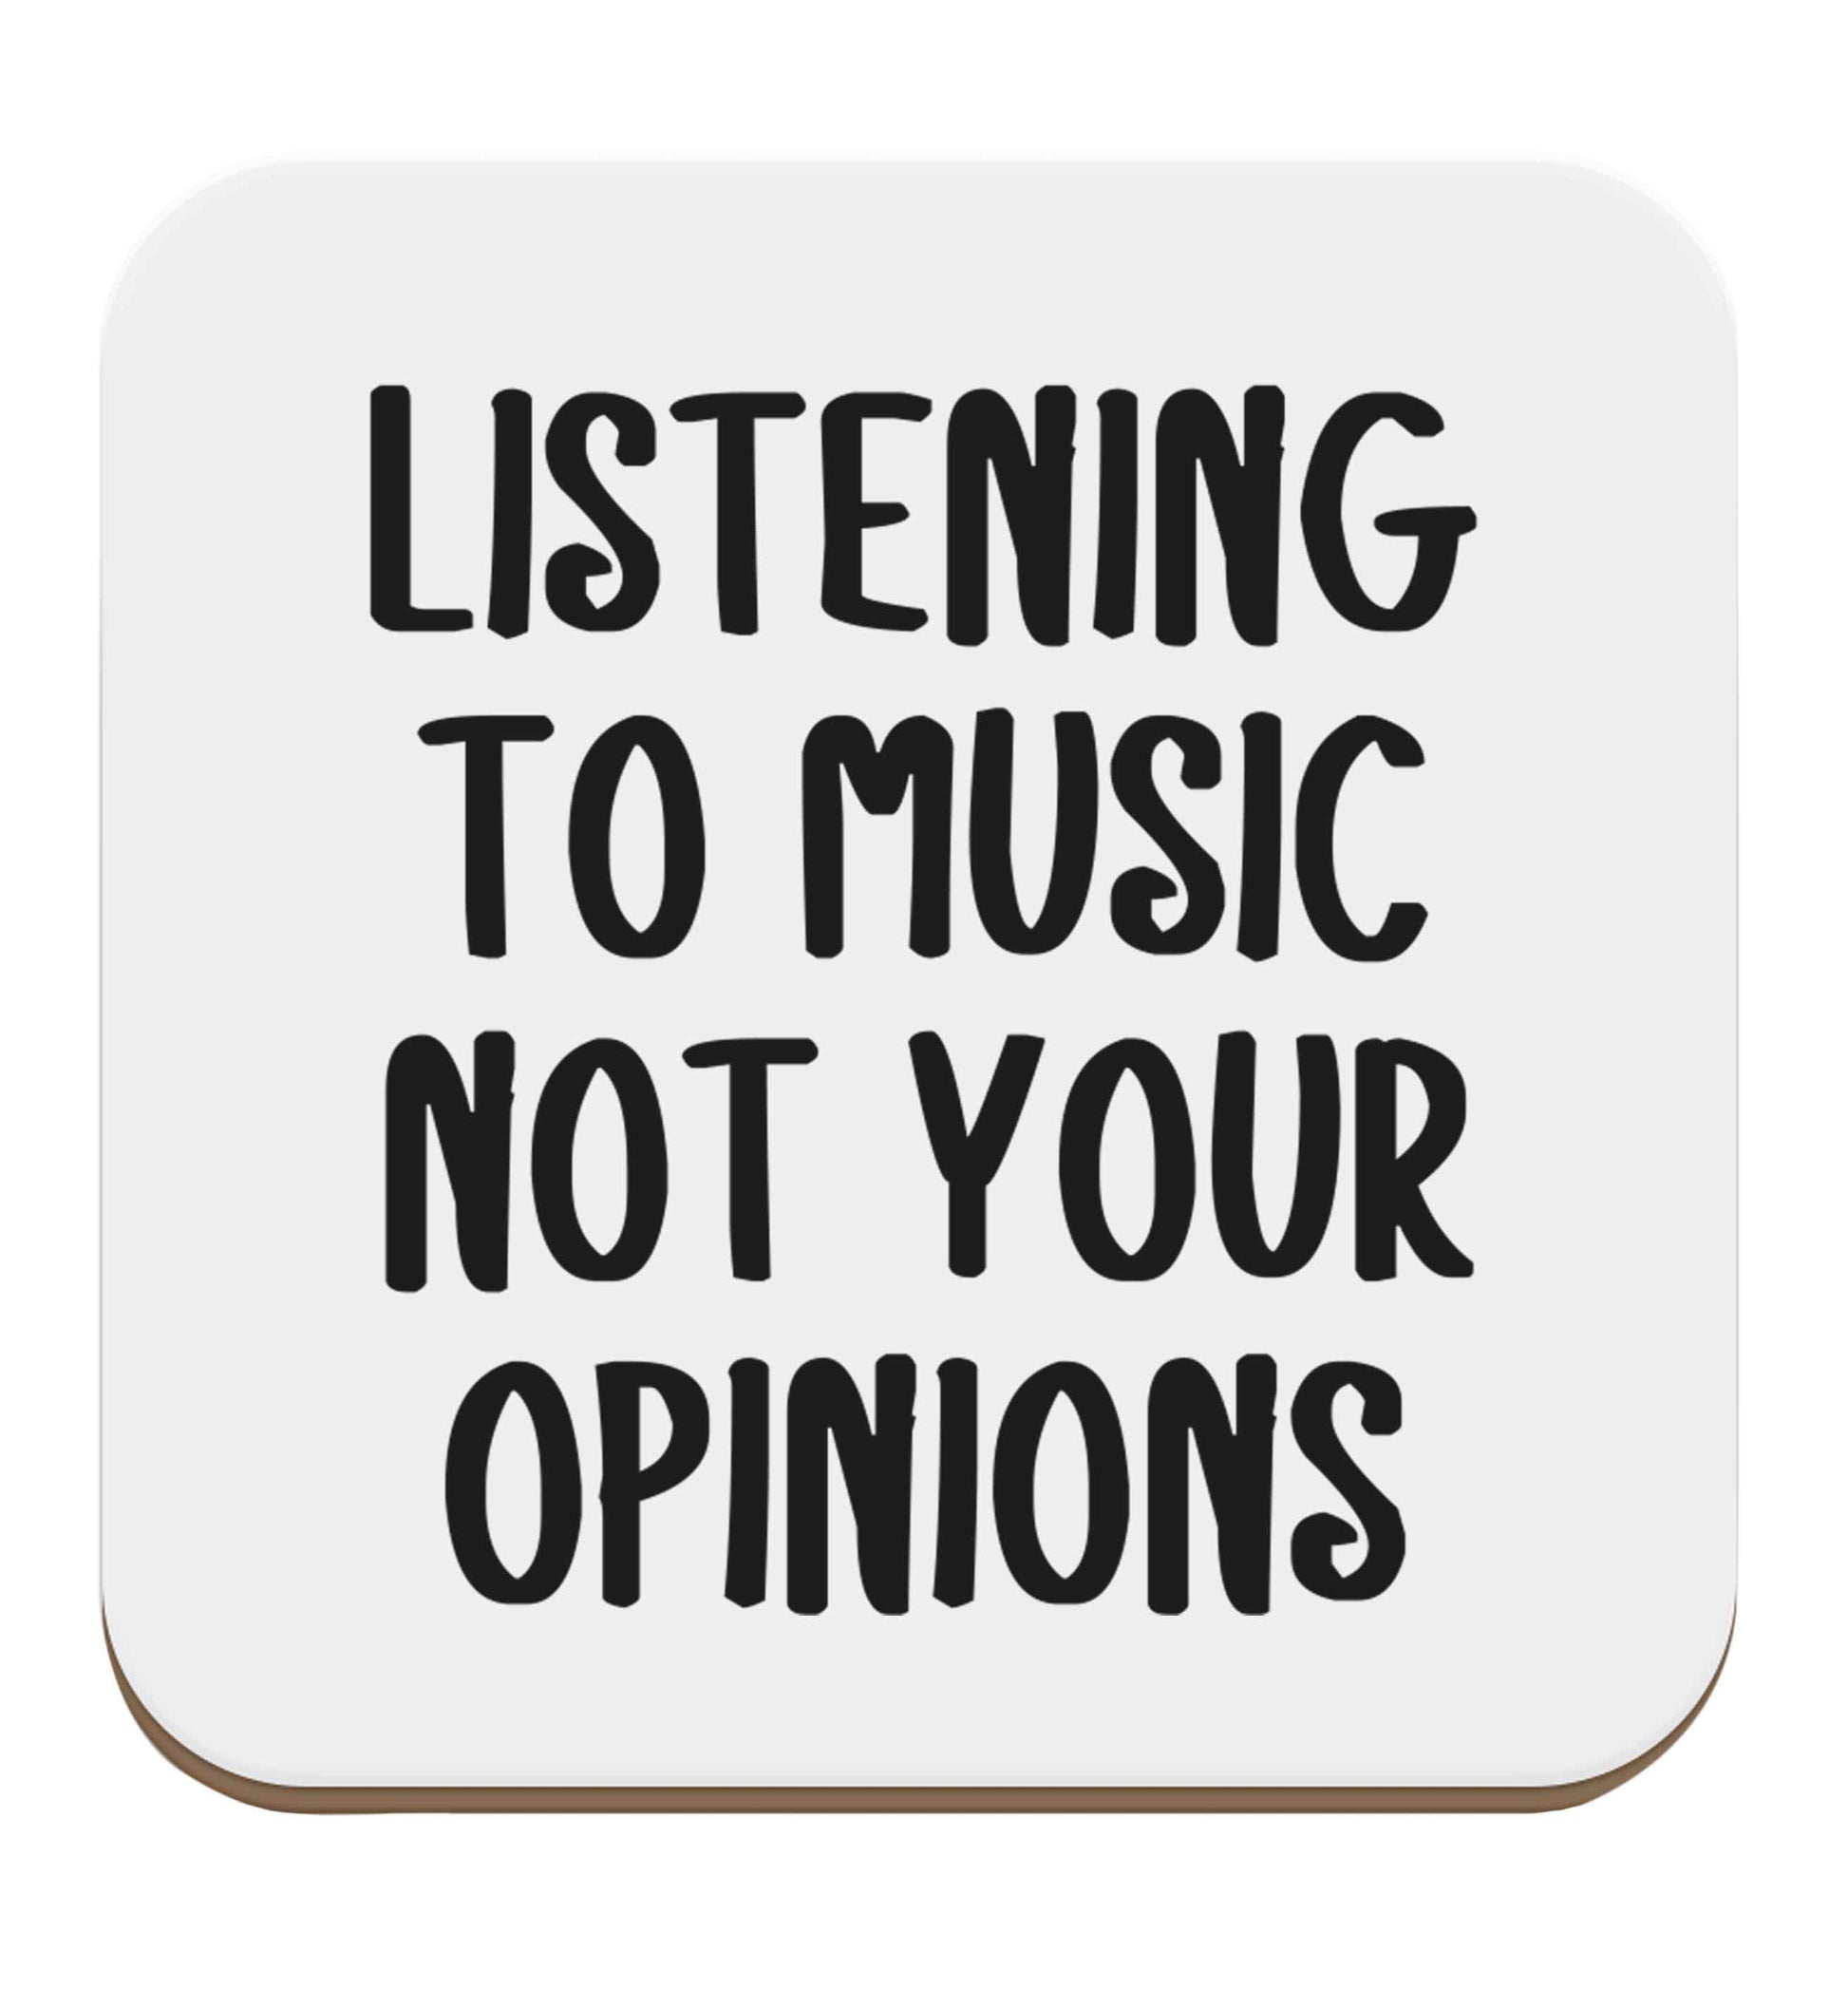 Listening to music not your opinions set of four coasters